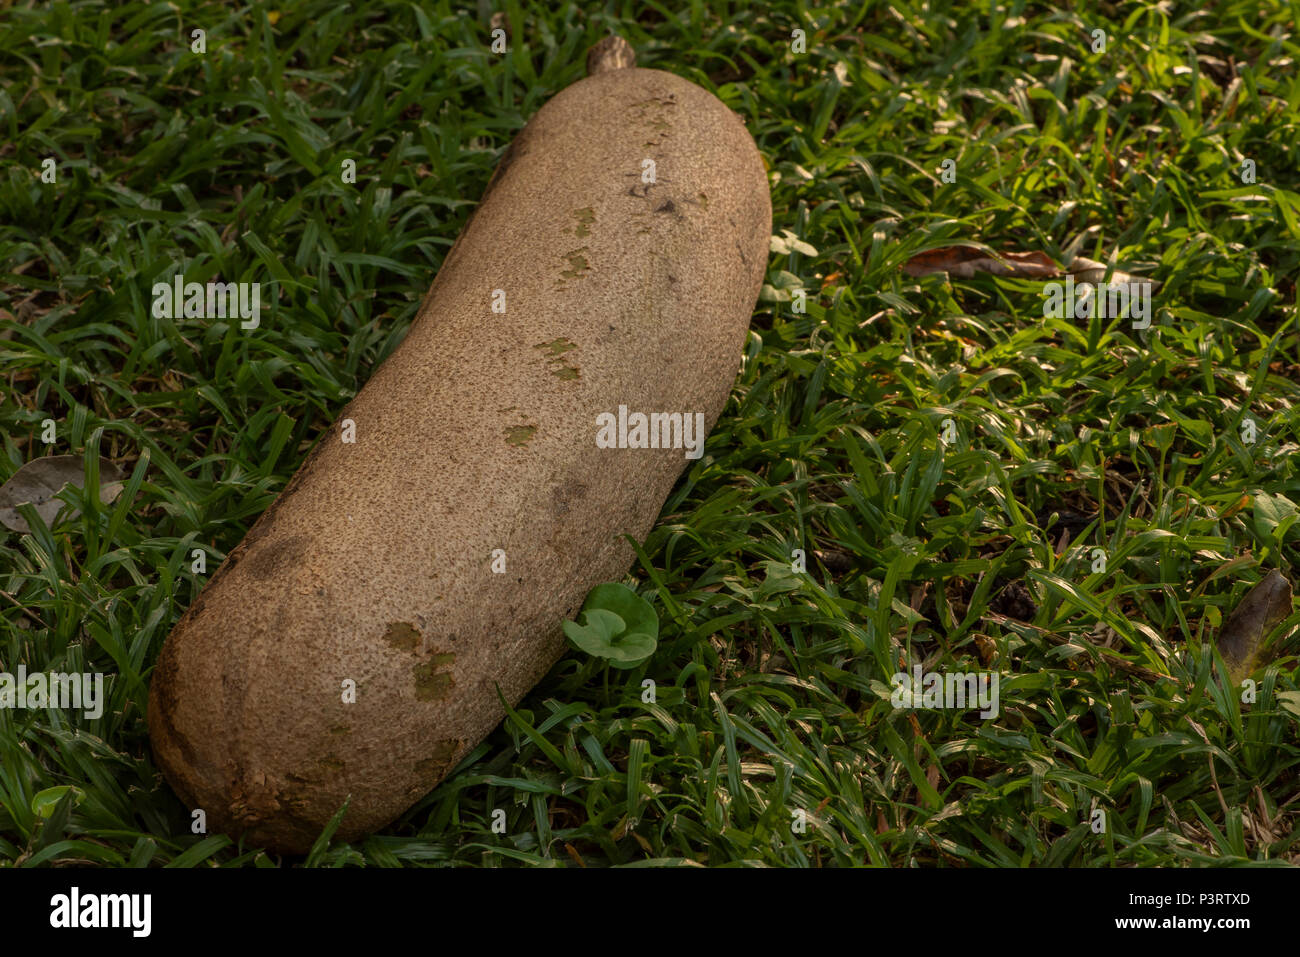 A fruit from the Sausage Tree which had fallen to the ground Stock Photo